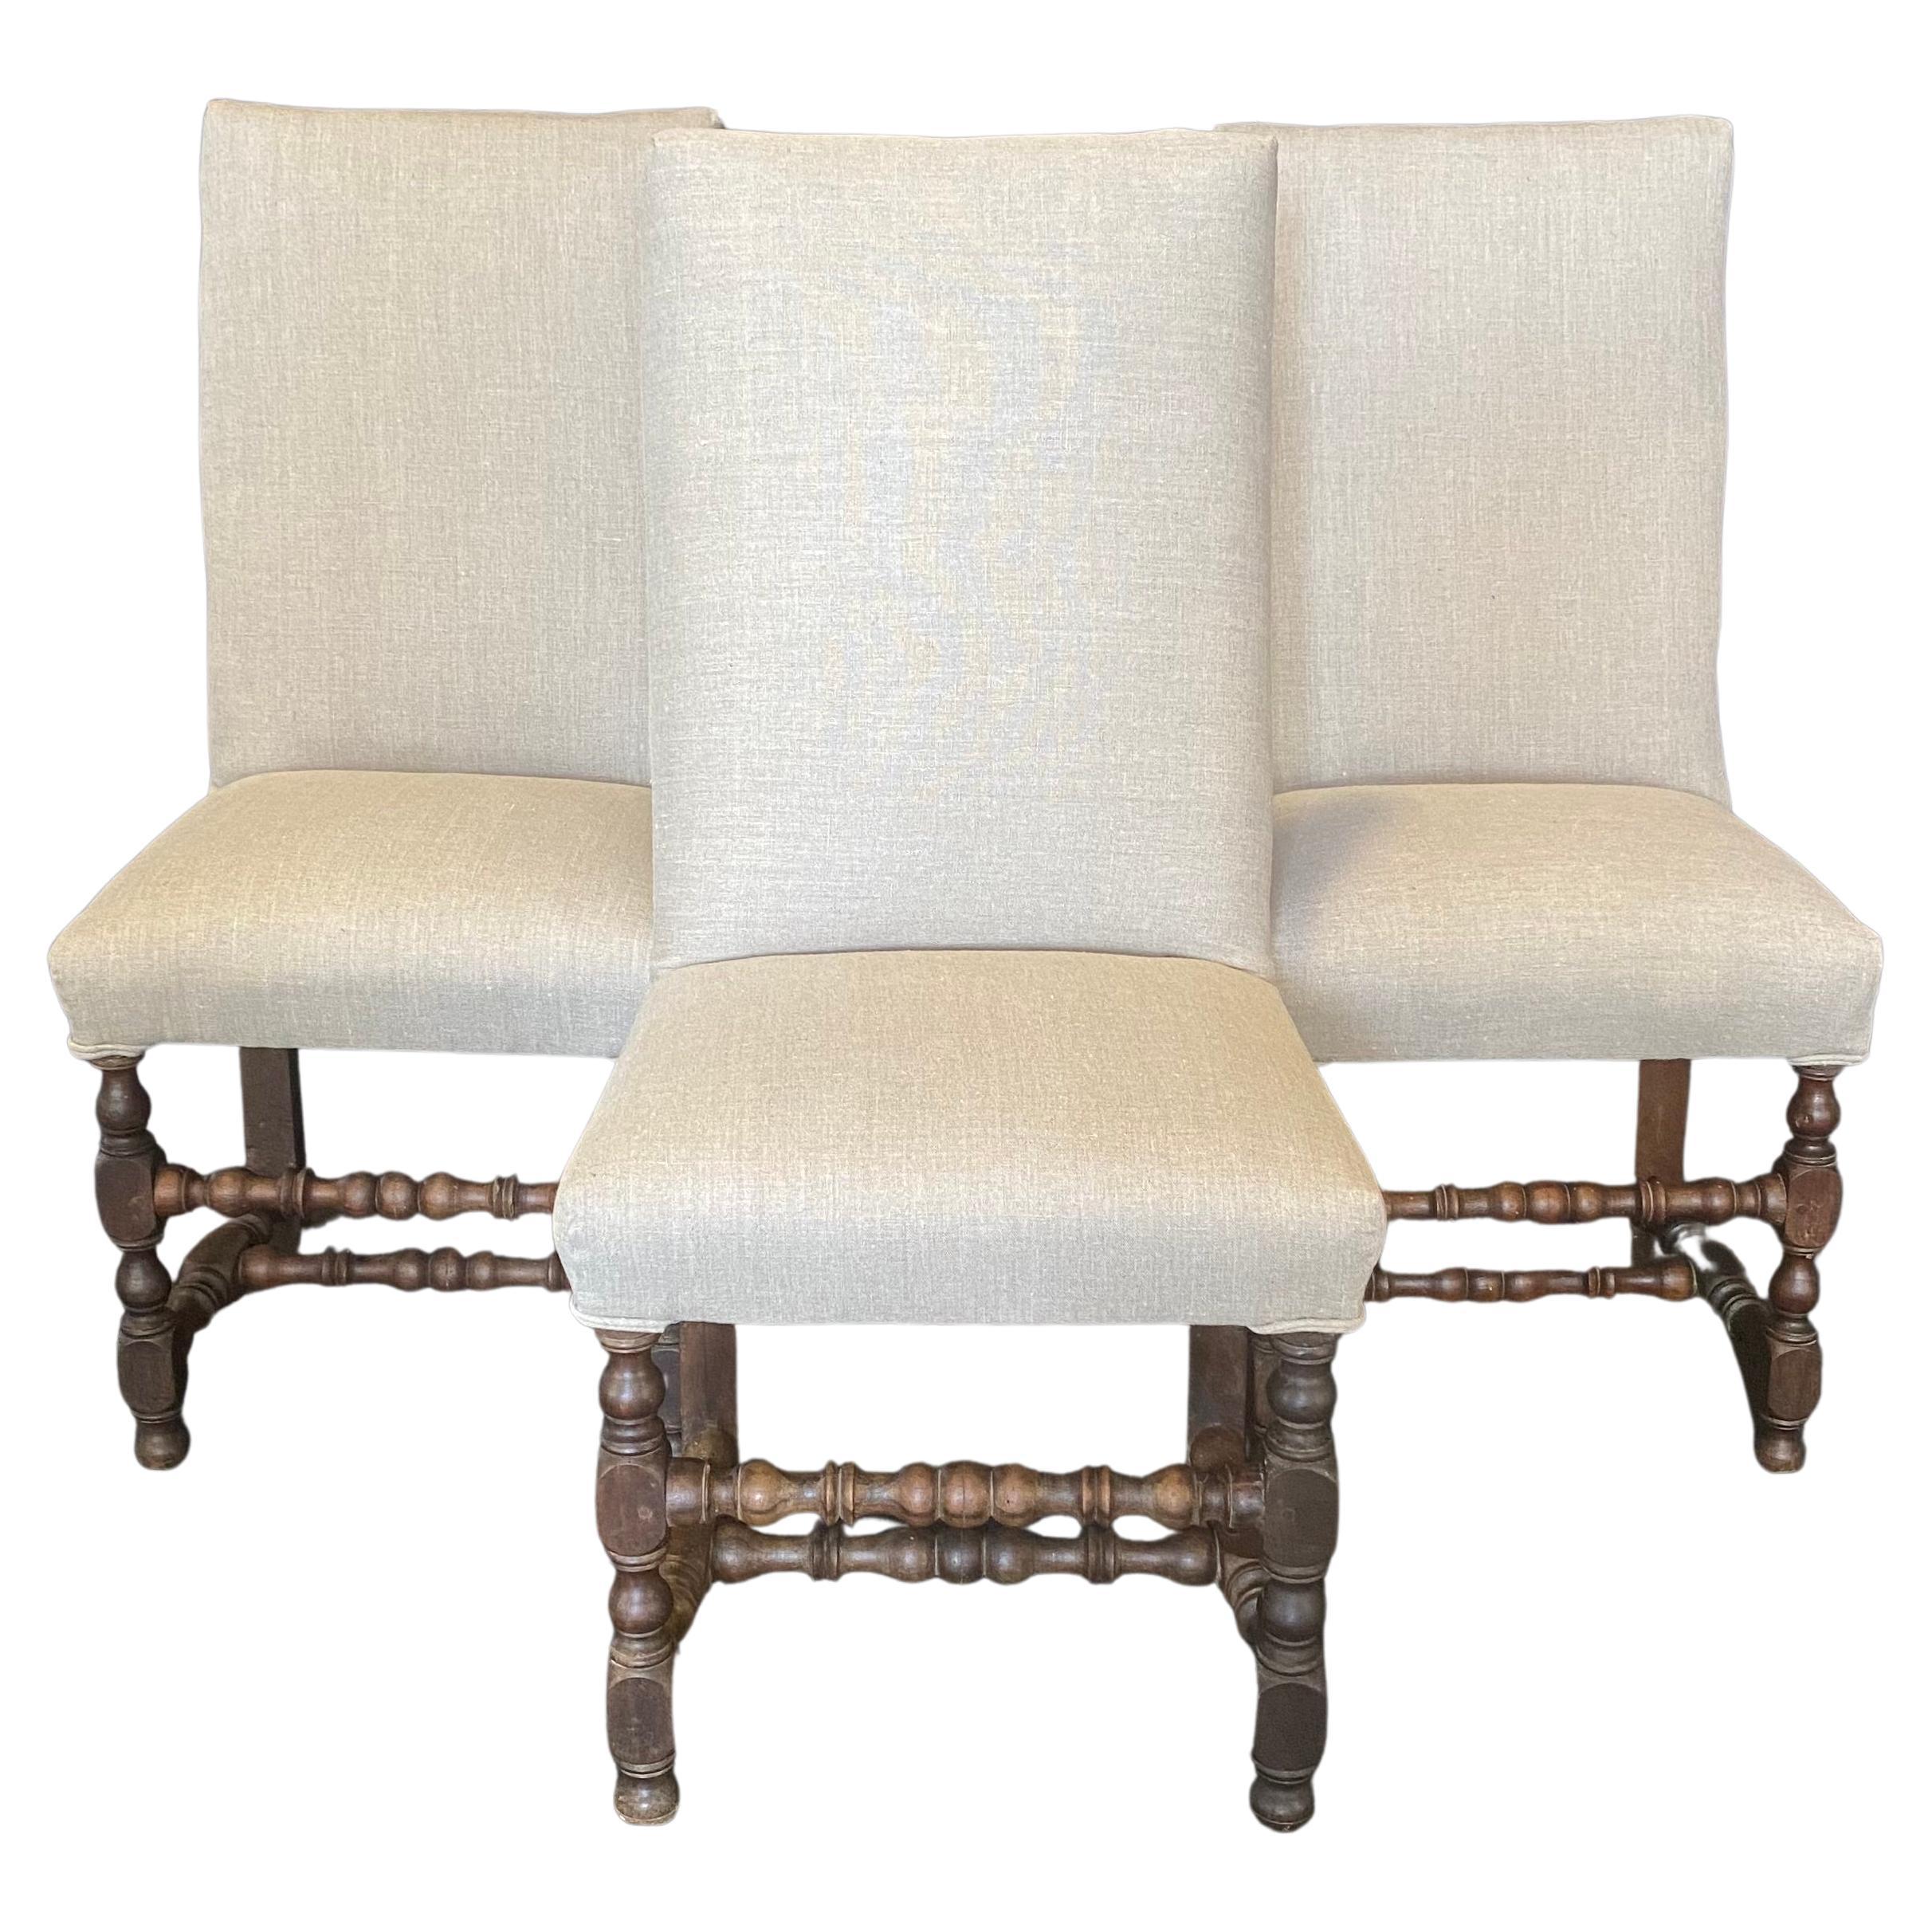 Set of Early French Louis XIII Chairs with Intricate Turnery For Sale